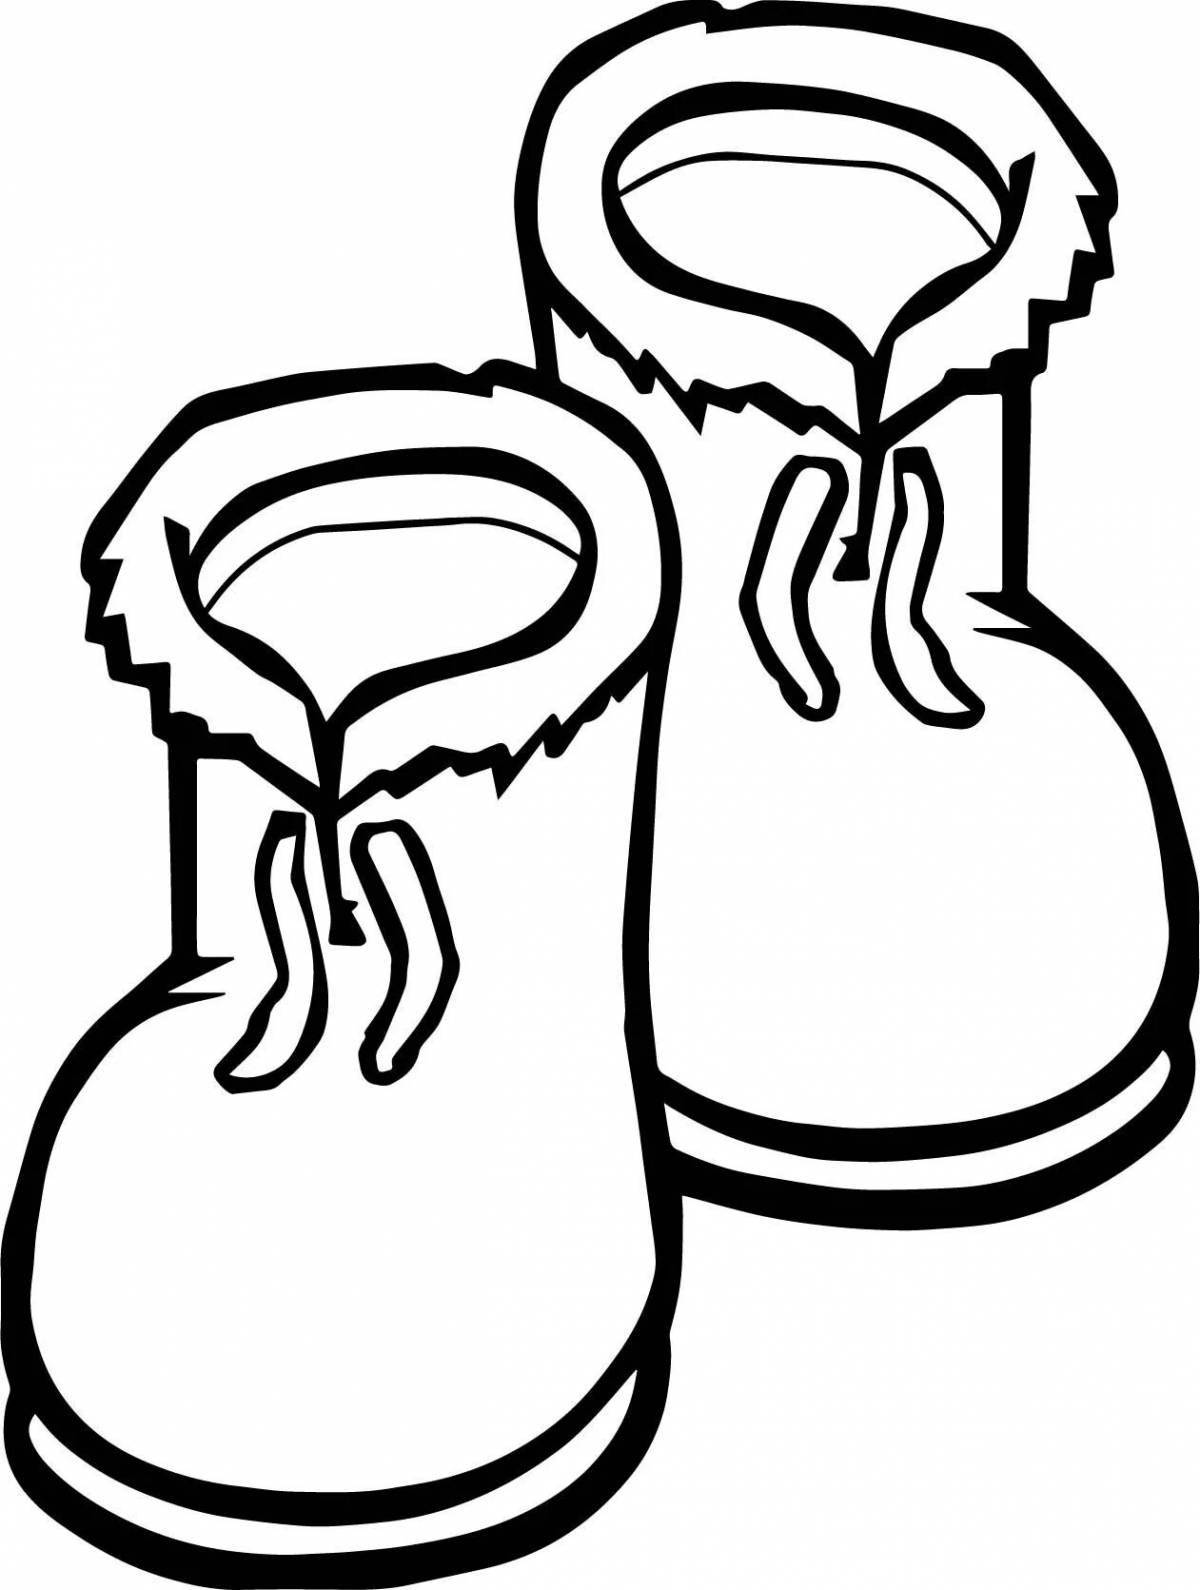 Fun coloring page for winter shoes for kids